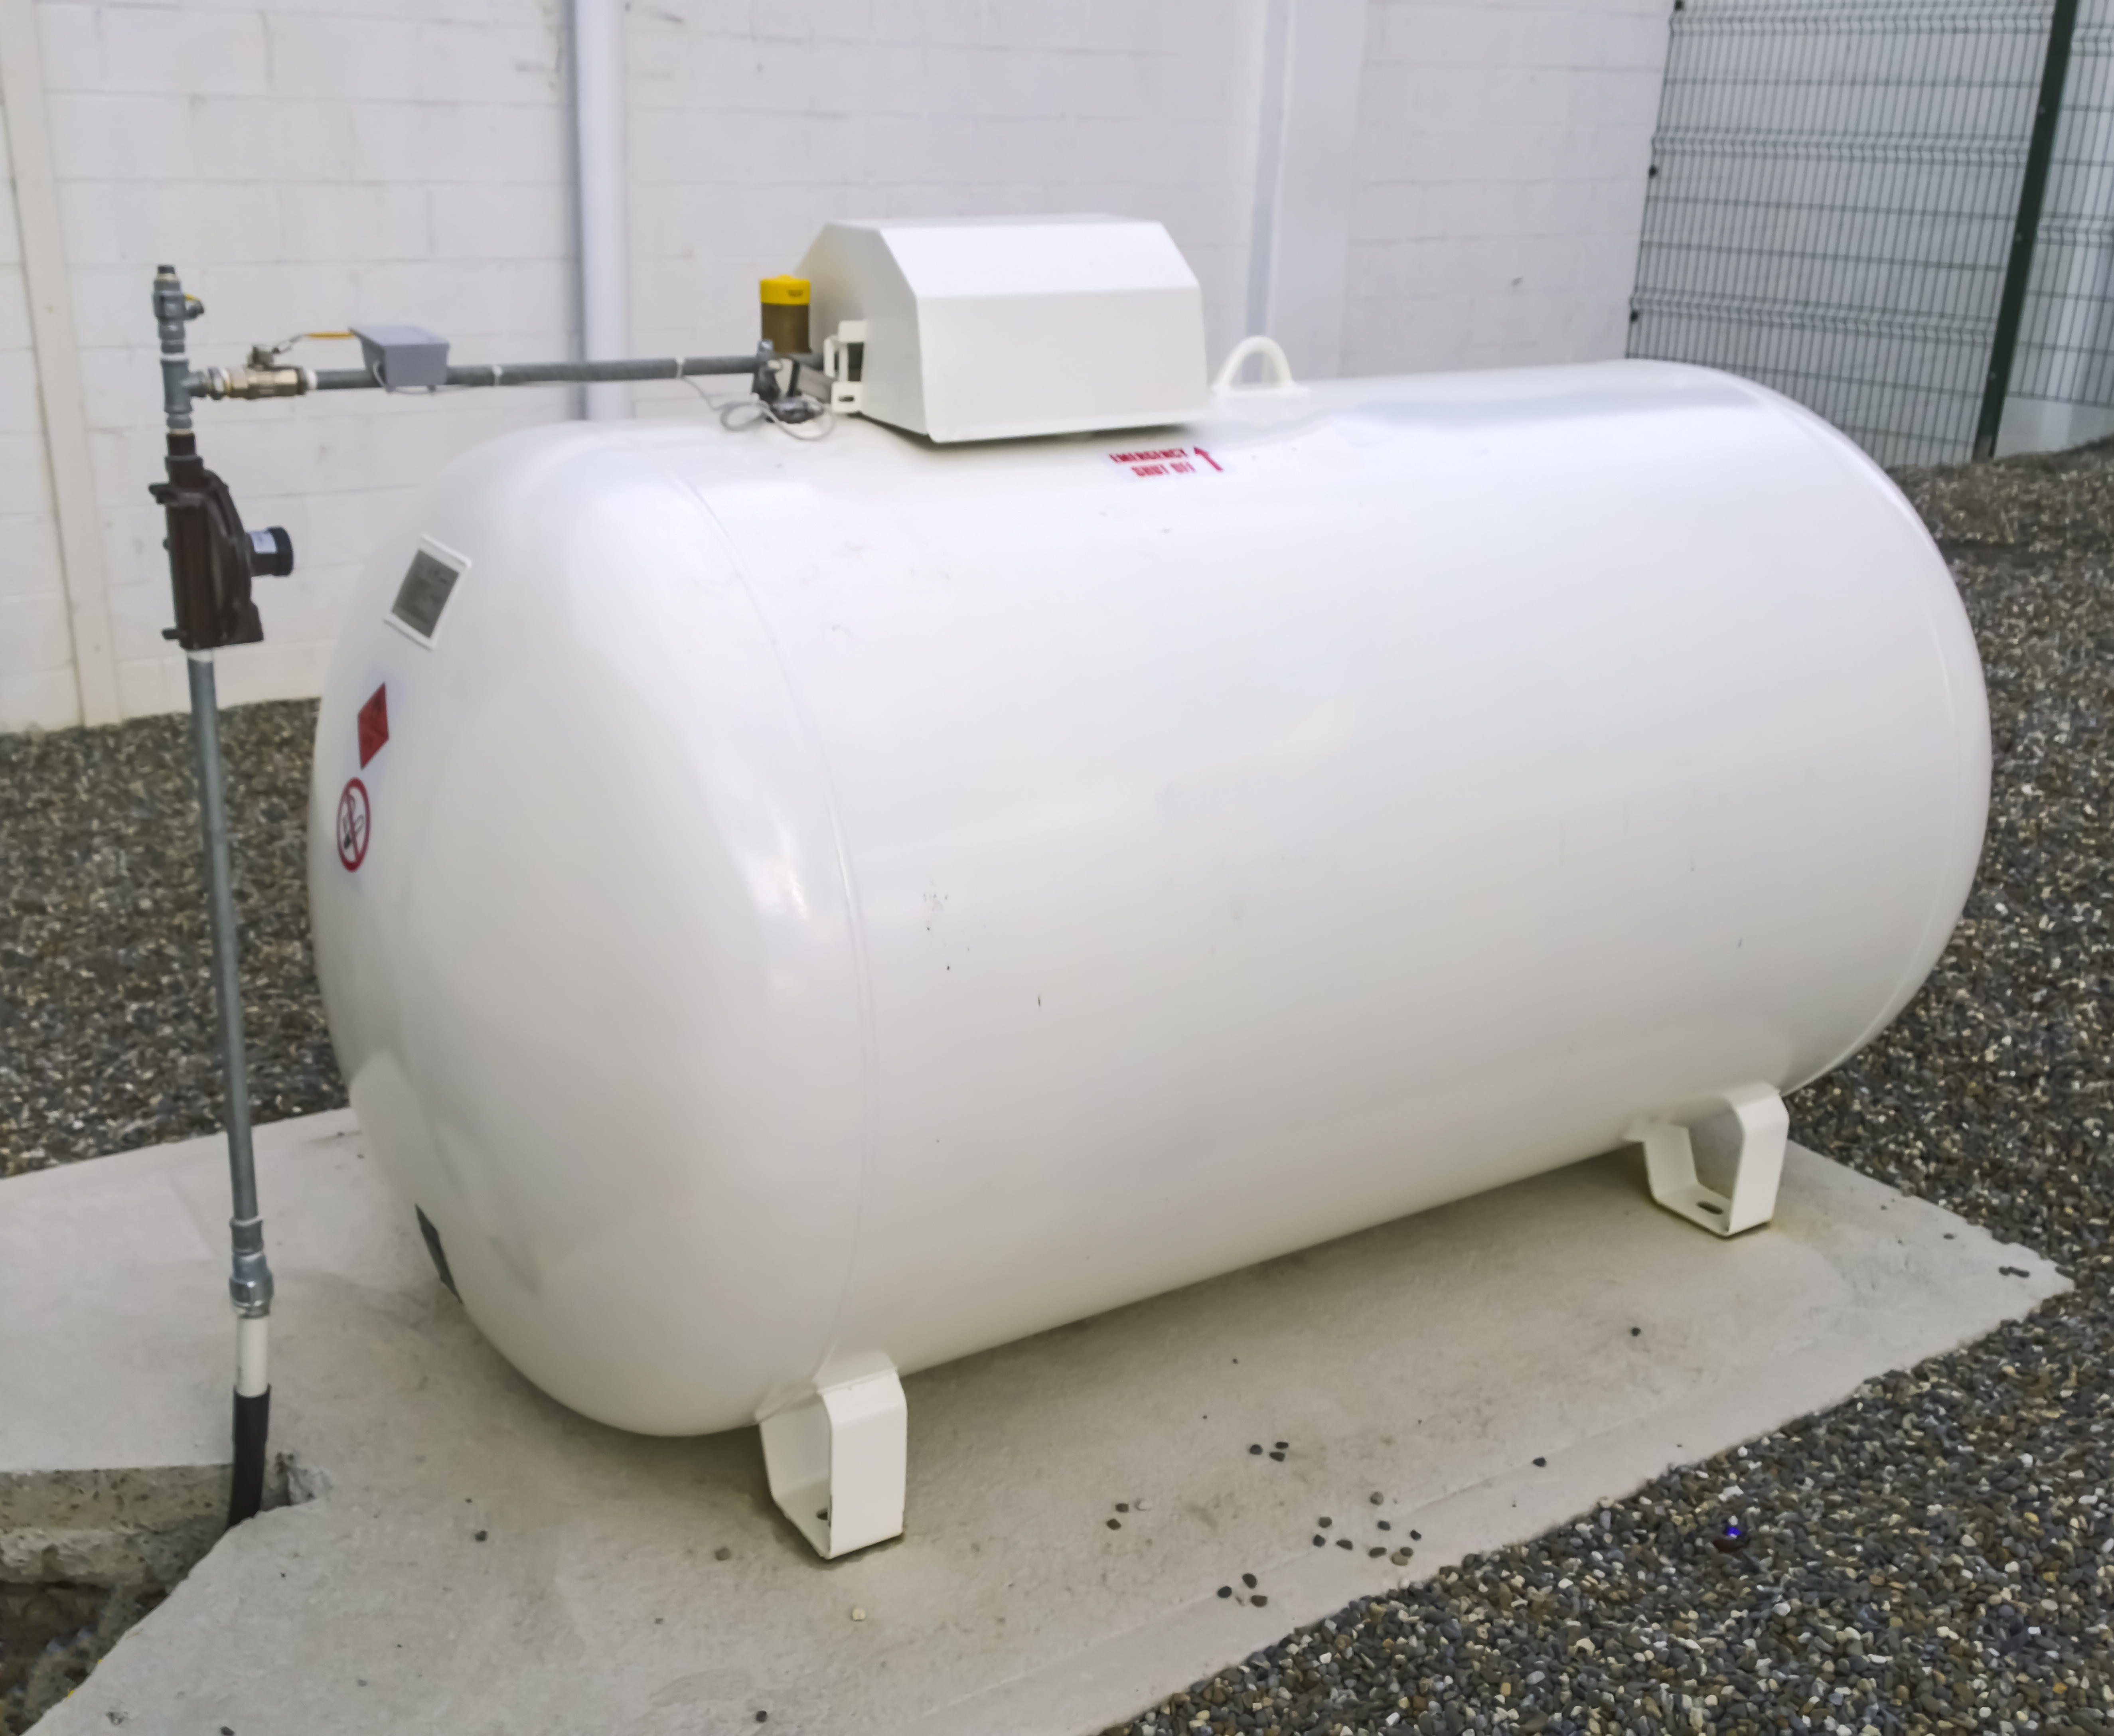 How do I Check the Level of my Propane Tank?